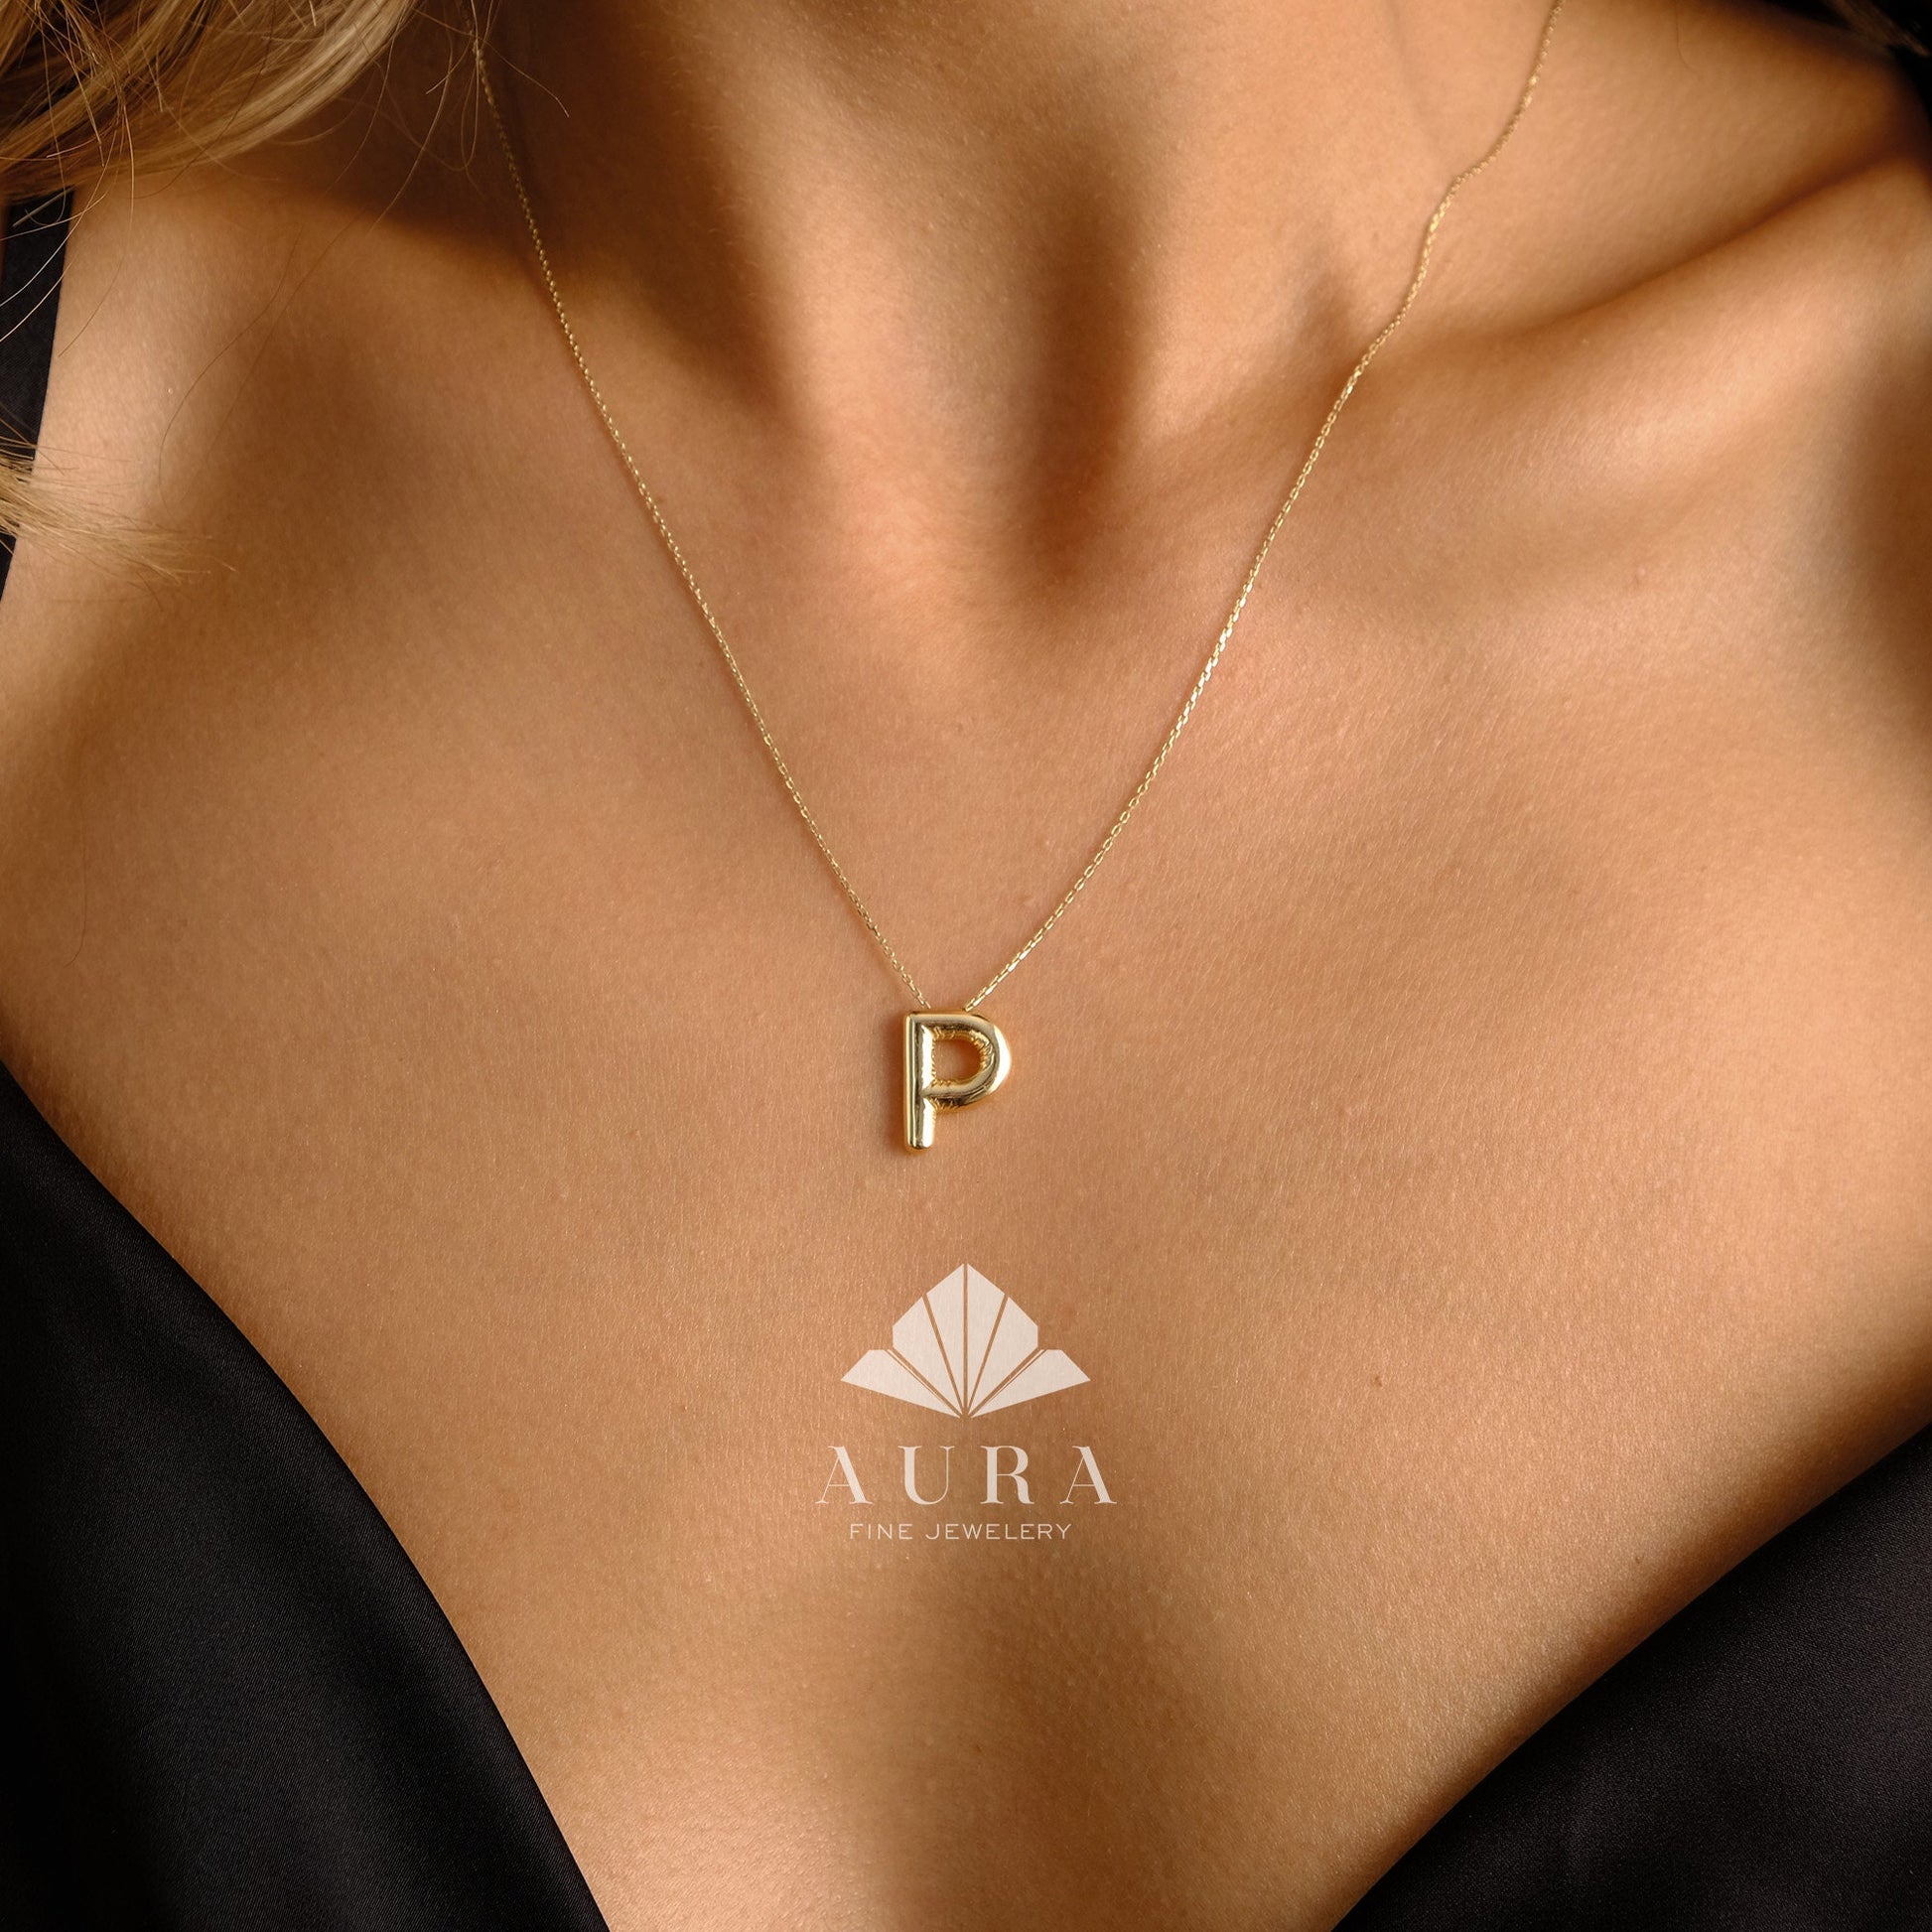 14K Gold Initial Necklace, Puff Letter Pendant, Balloon Letter Necklace, Tiny Letter Charm, Personalized Name Necklace, Gift For Her